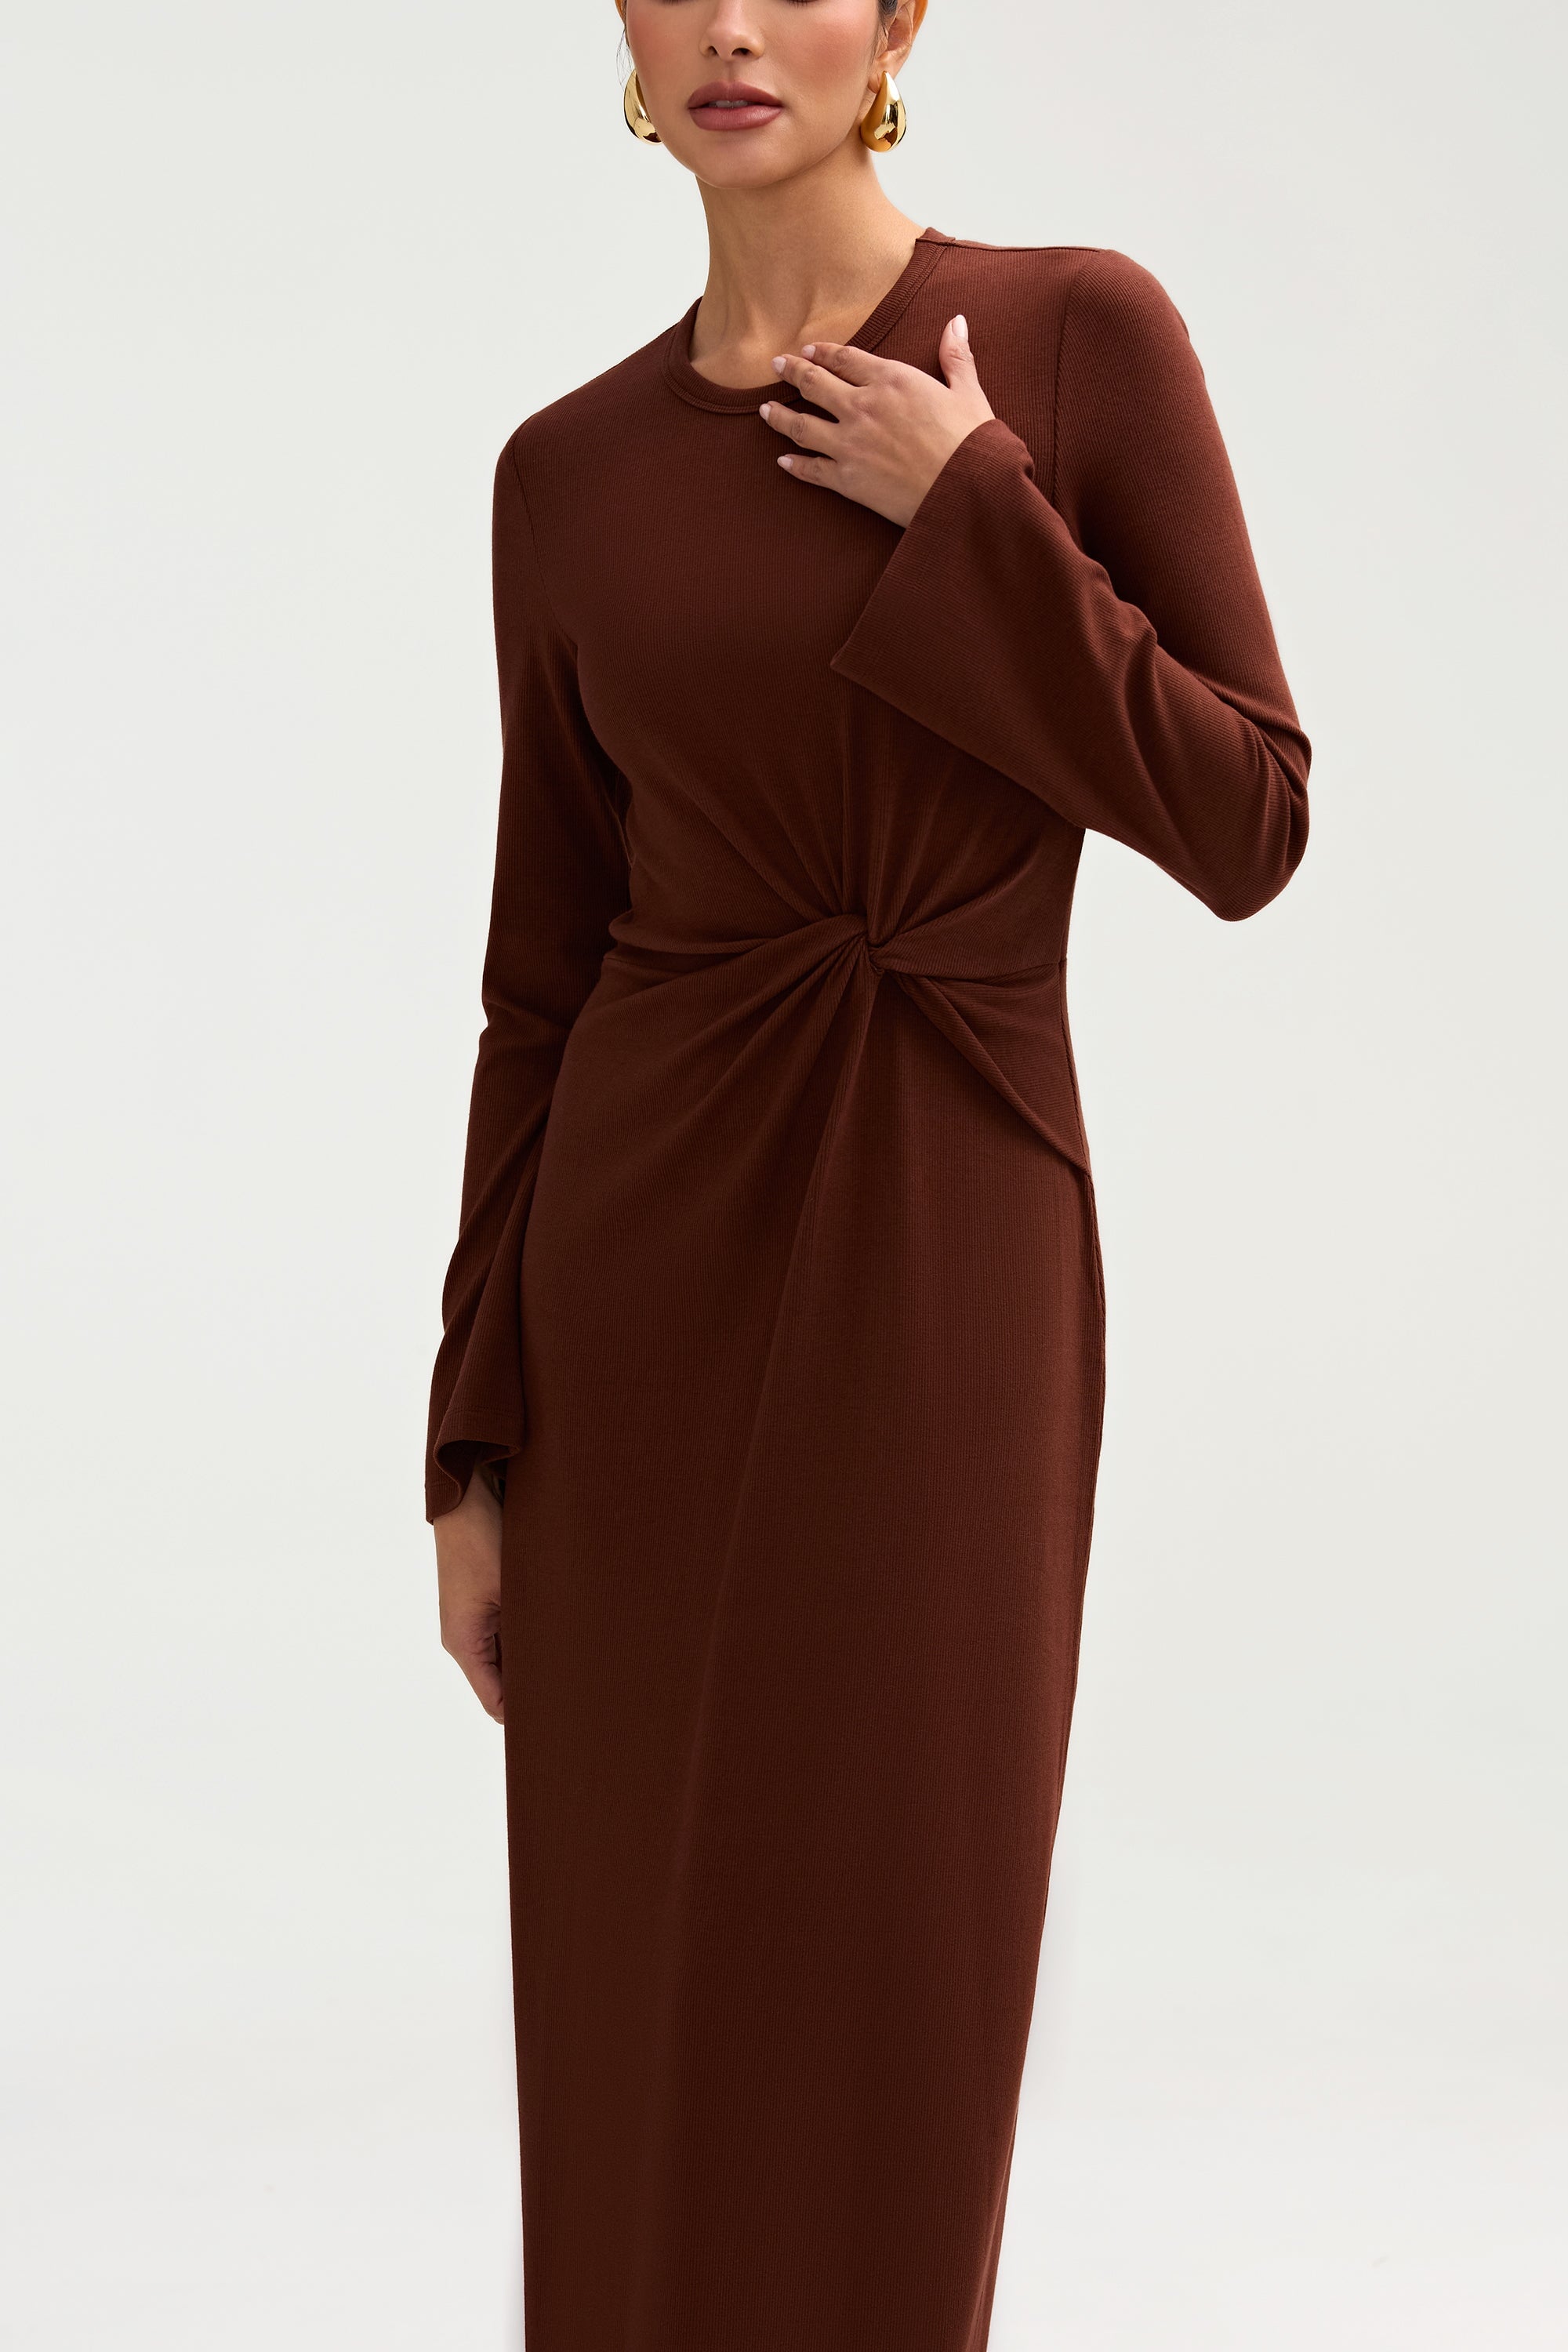 Aissia Ribbed Twist Front Maxi Dress - Chocolate Clothing epschoolboard 